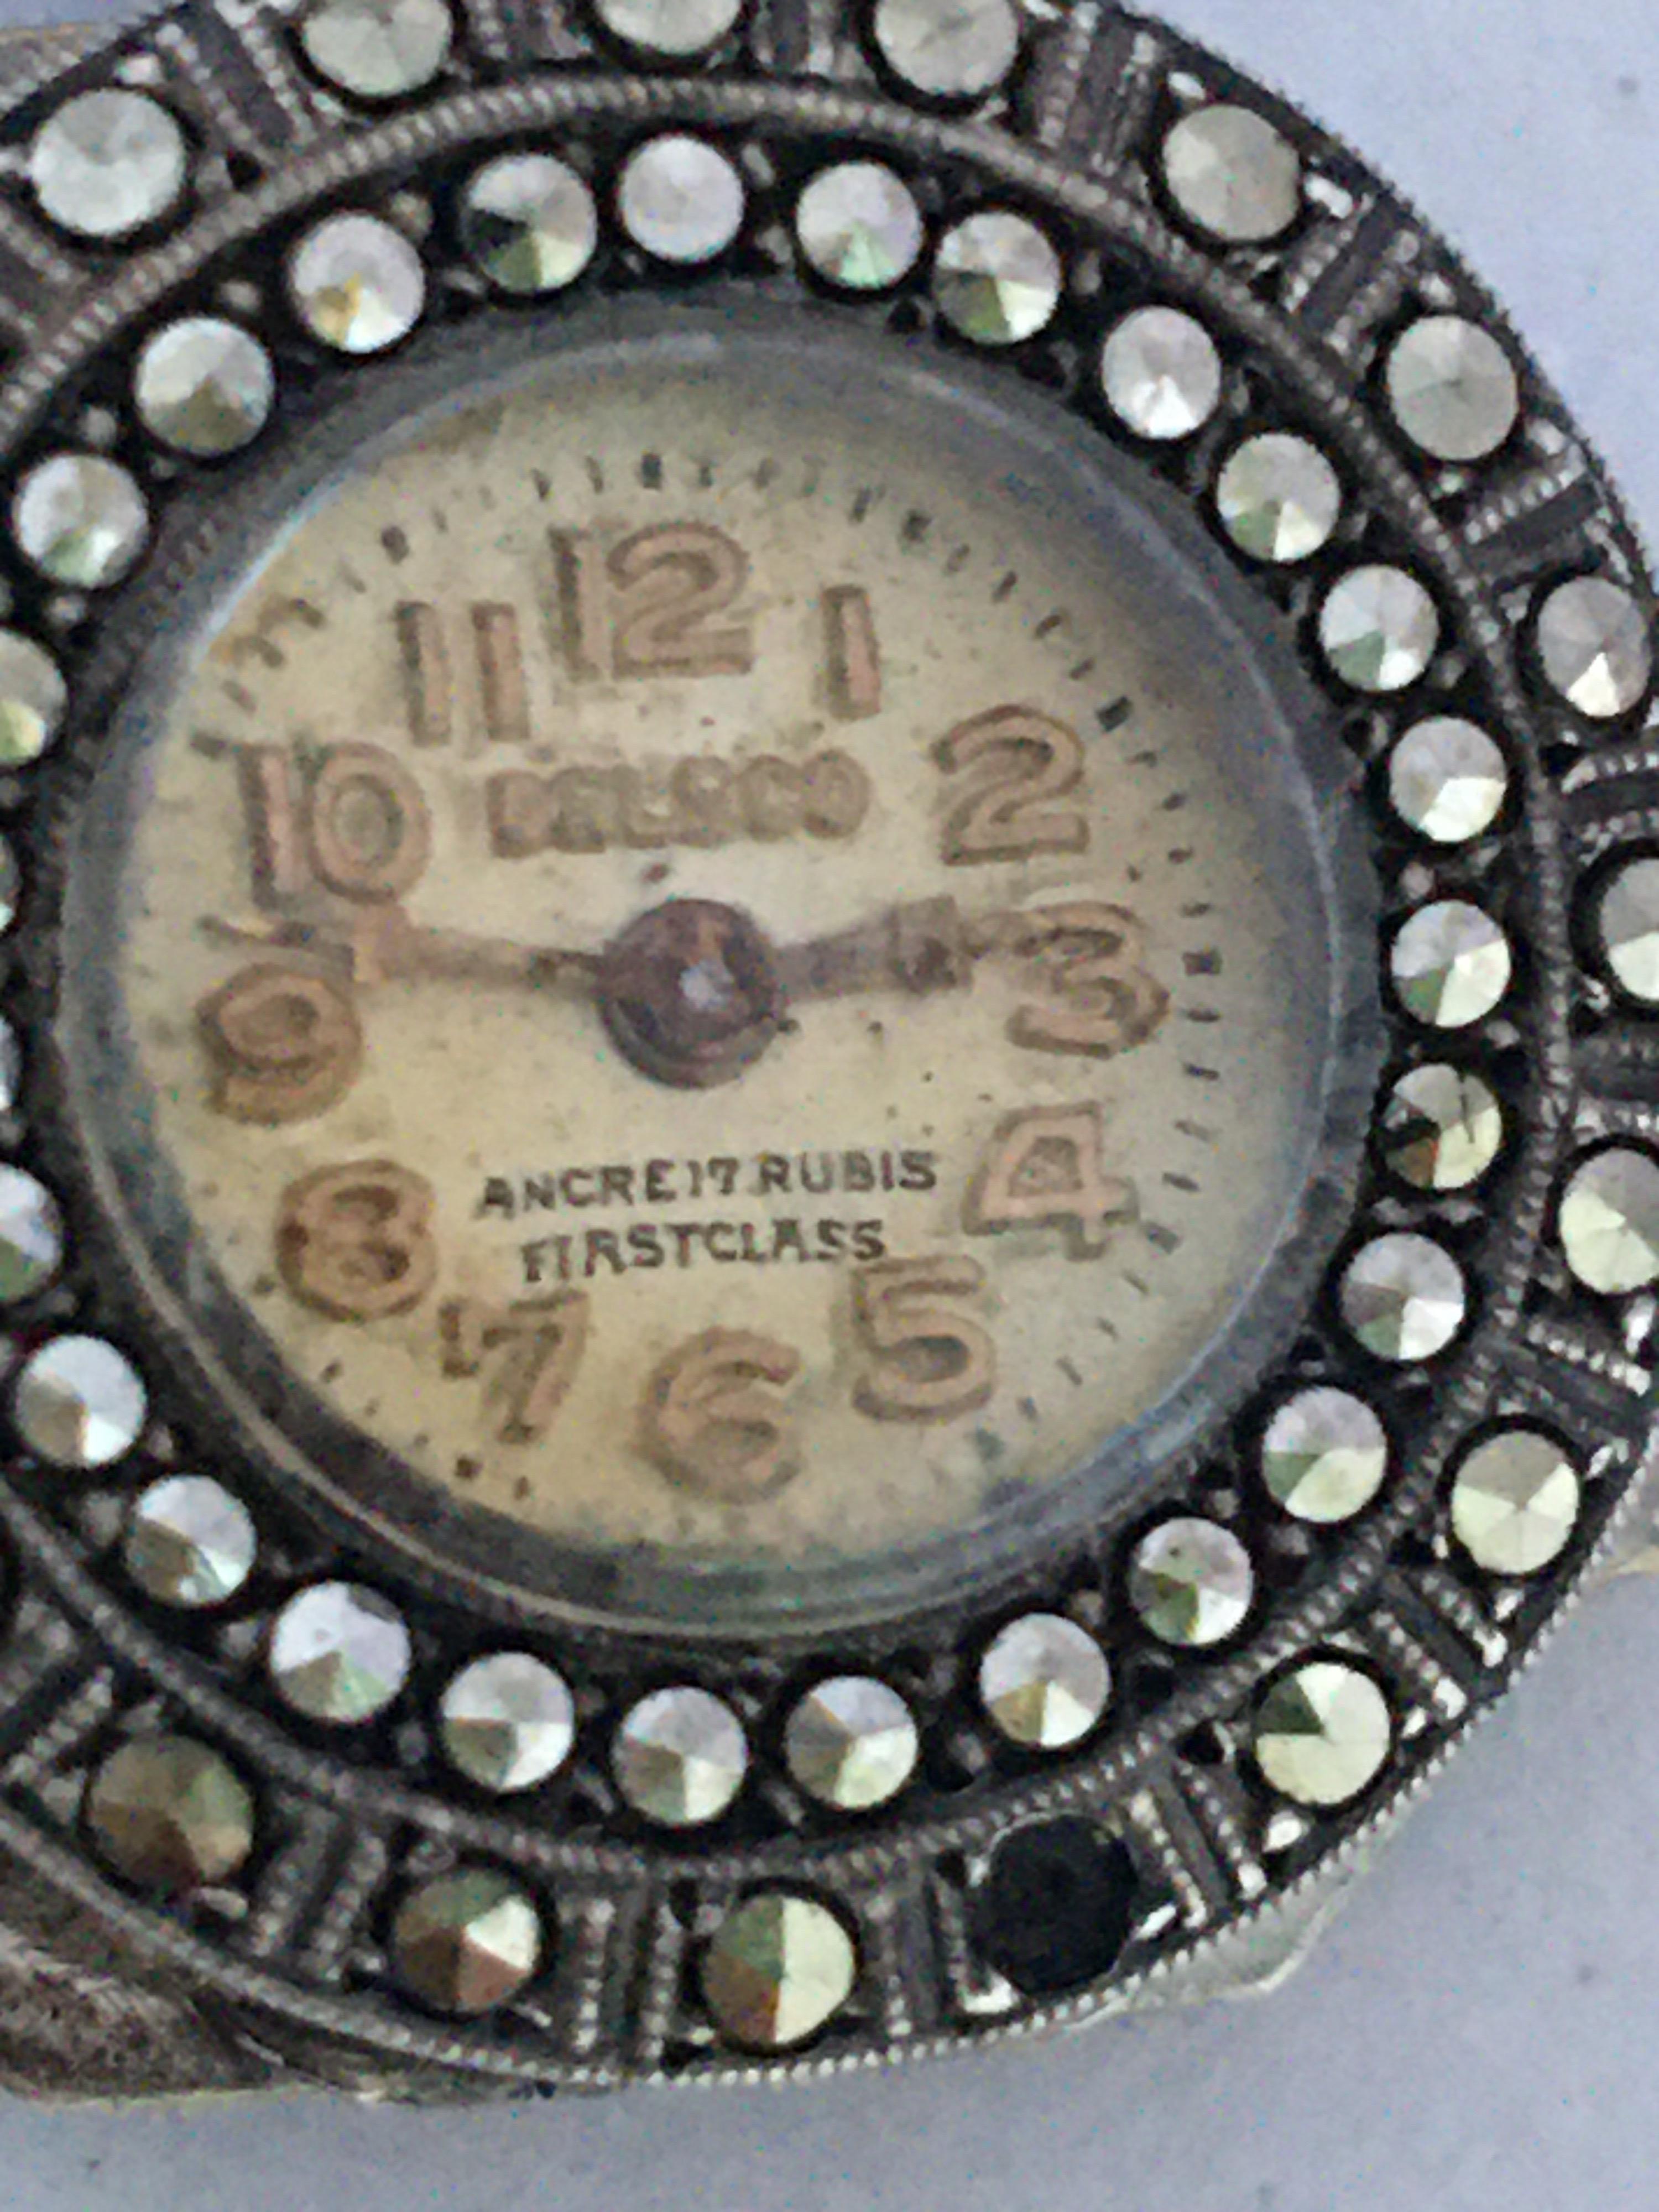 Antique Silver and Marcasite Nurse’s / Brooch Watch In Good Condition For Sale In Carlisle, GB